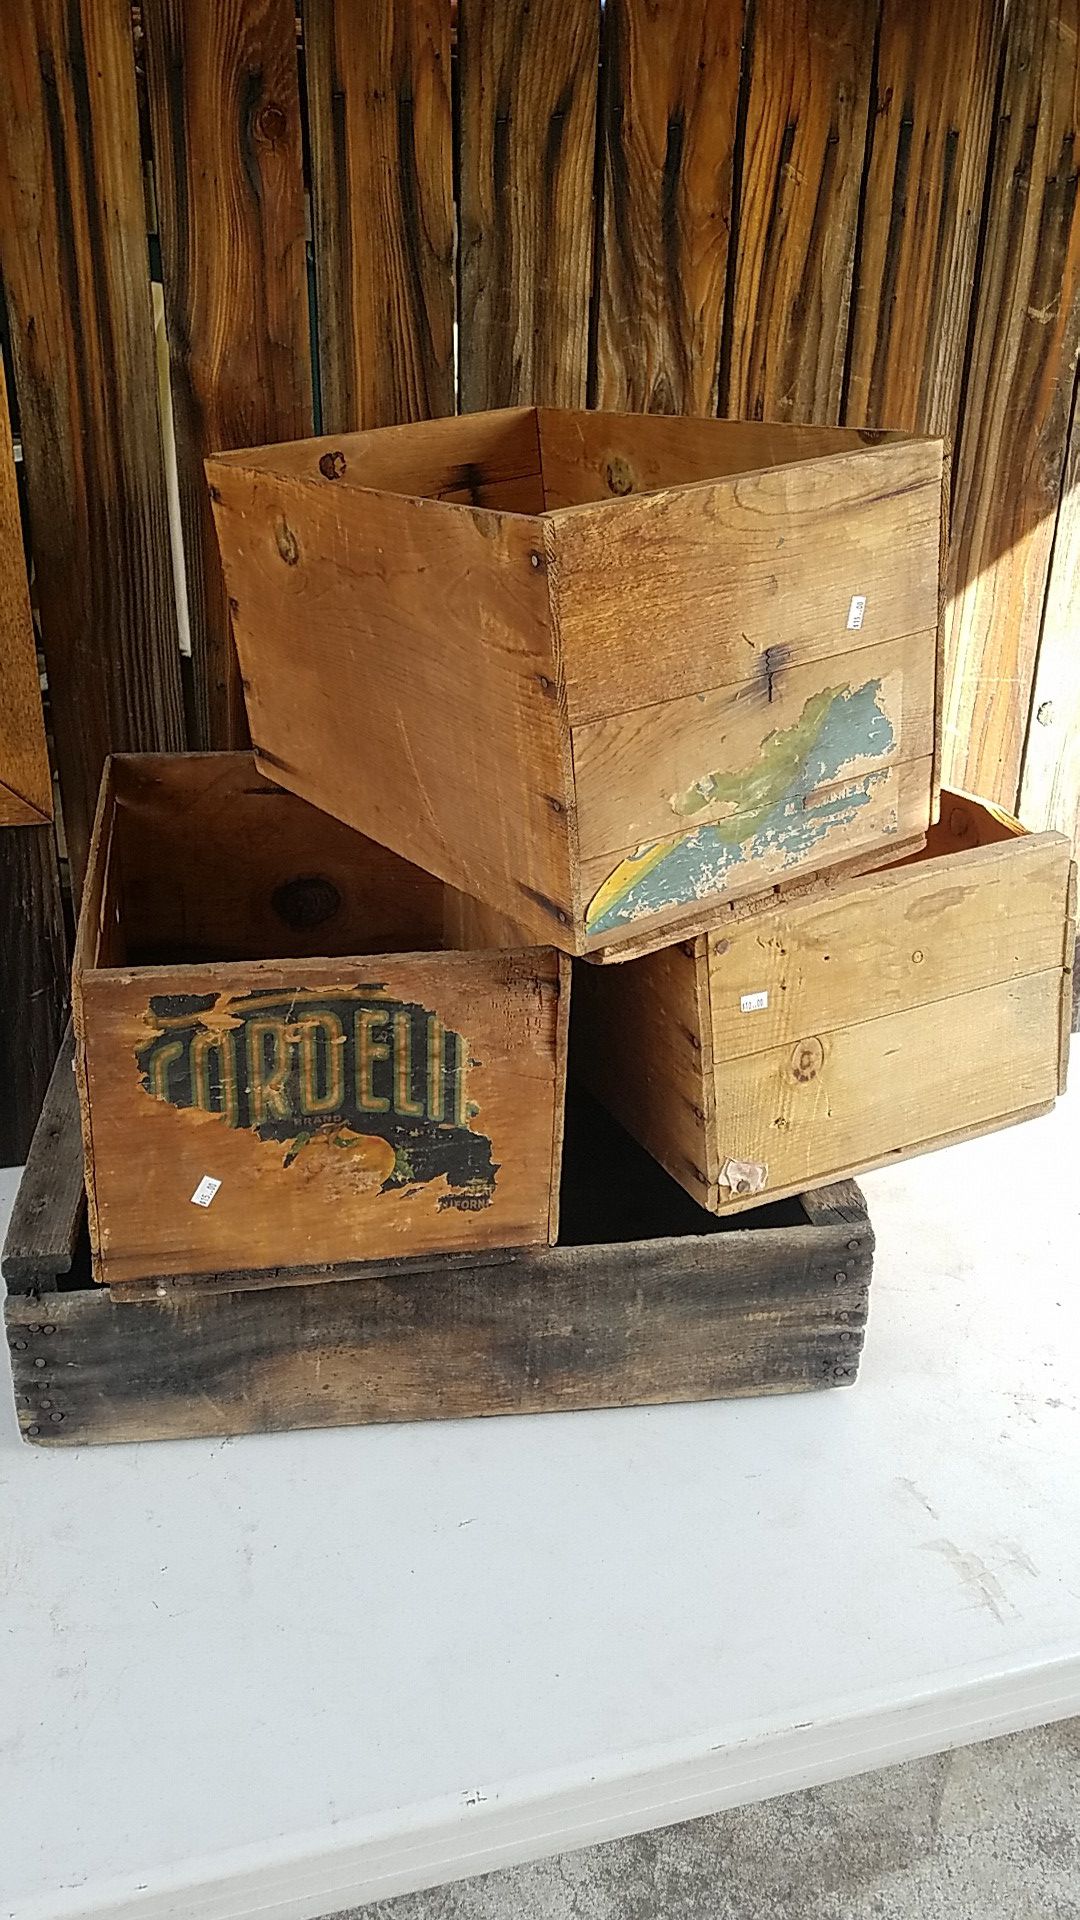 Antique wooden crates $20 for all four good used condition I'm located in Redlands